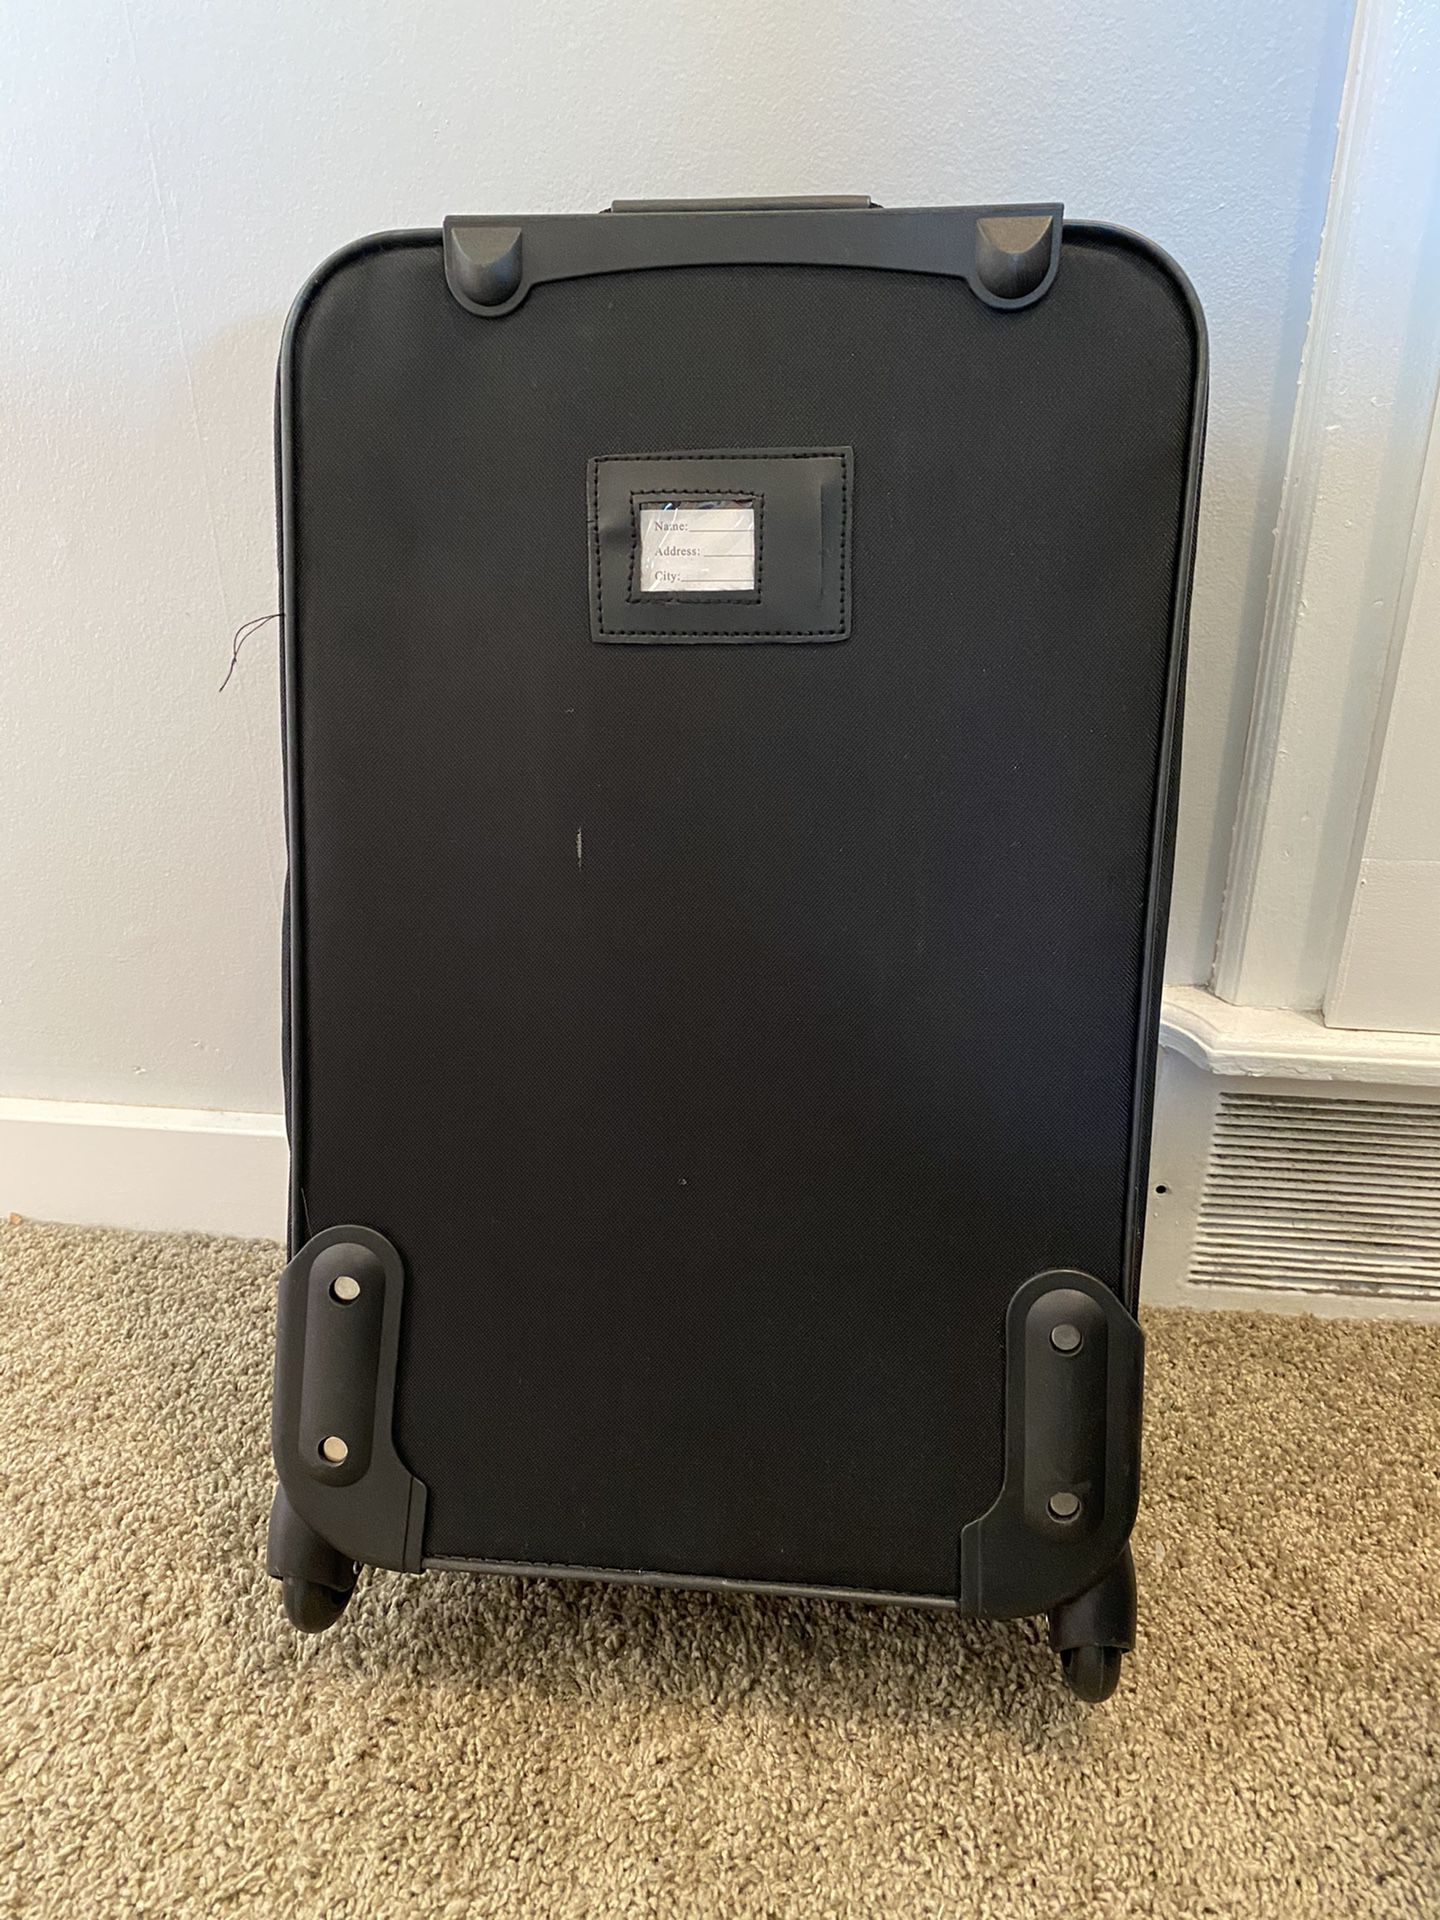 Explorer 707 suitcase for Sale in Oklahoma City, OK - OfferUp